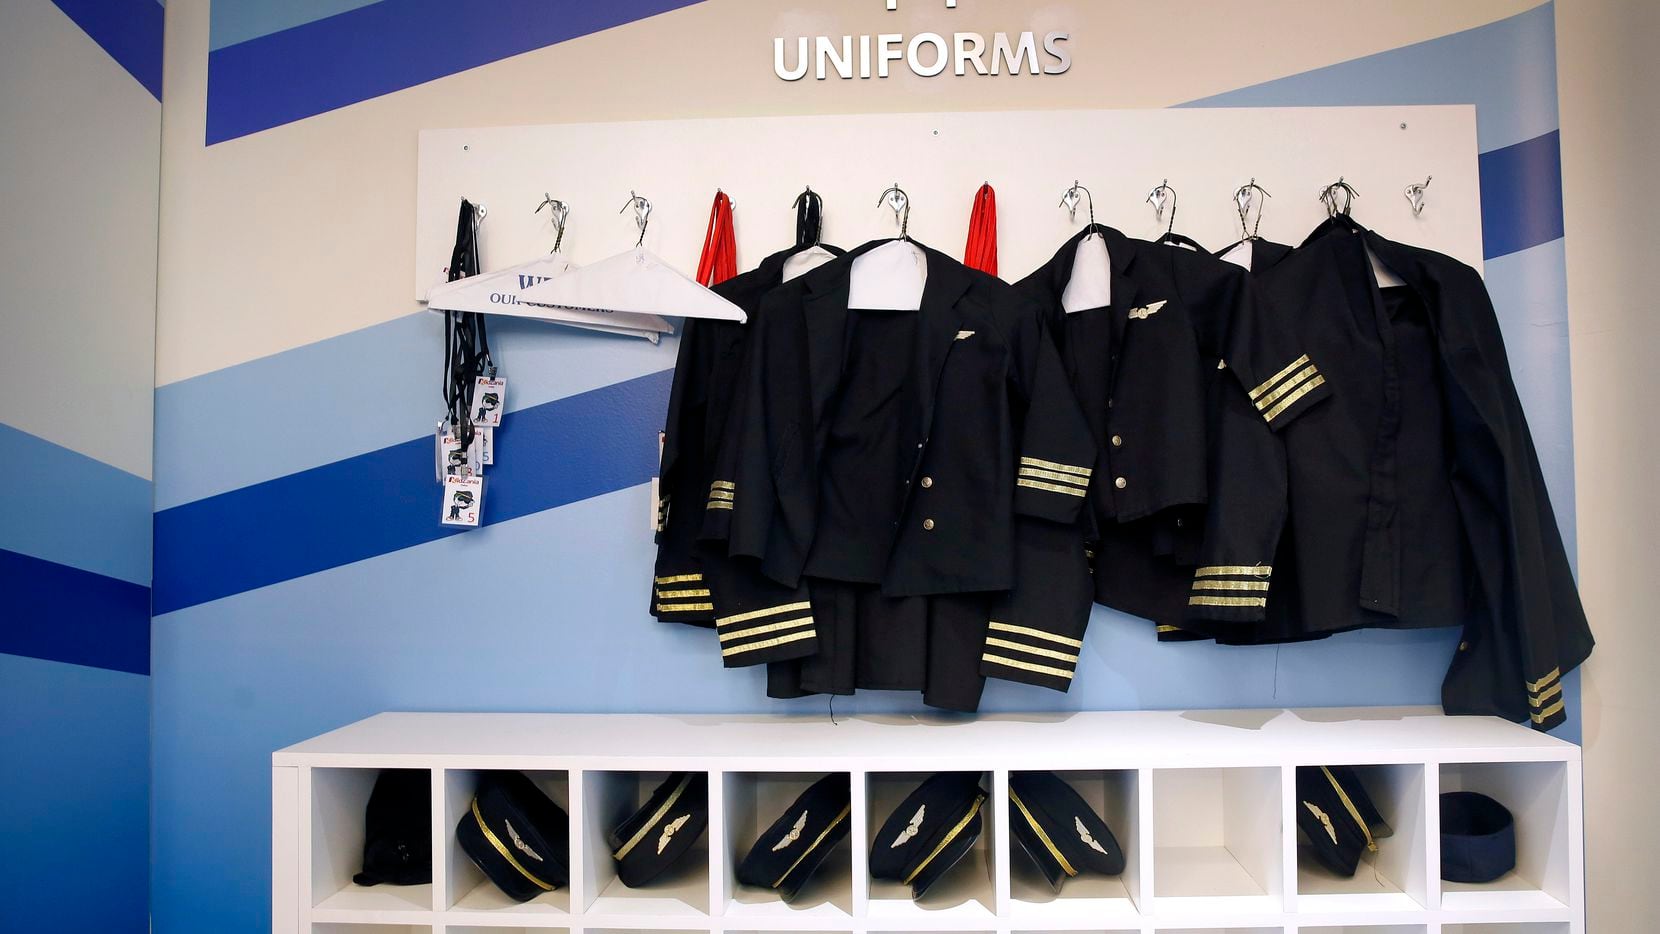 American Airlines hopes to hire up to 1,350 pilots by the end of 2022 to meet increasing...